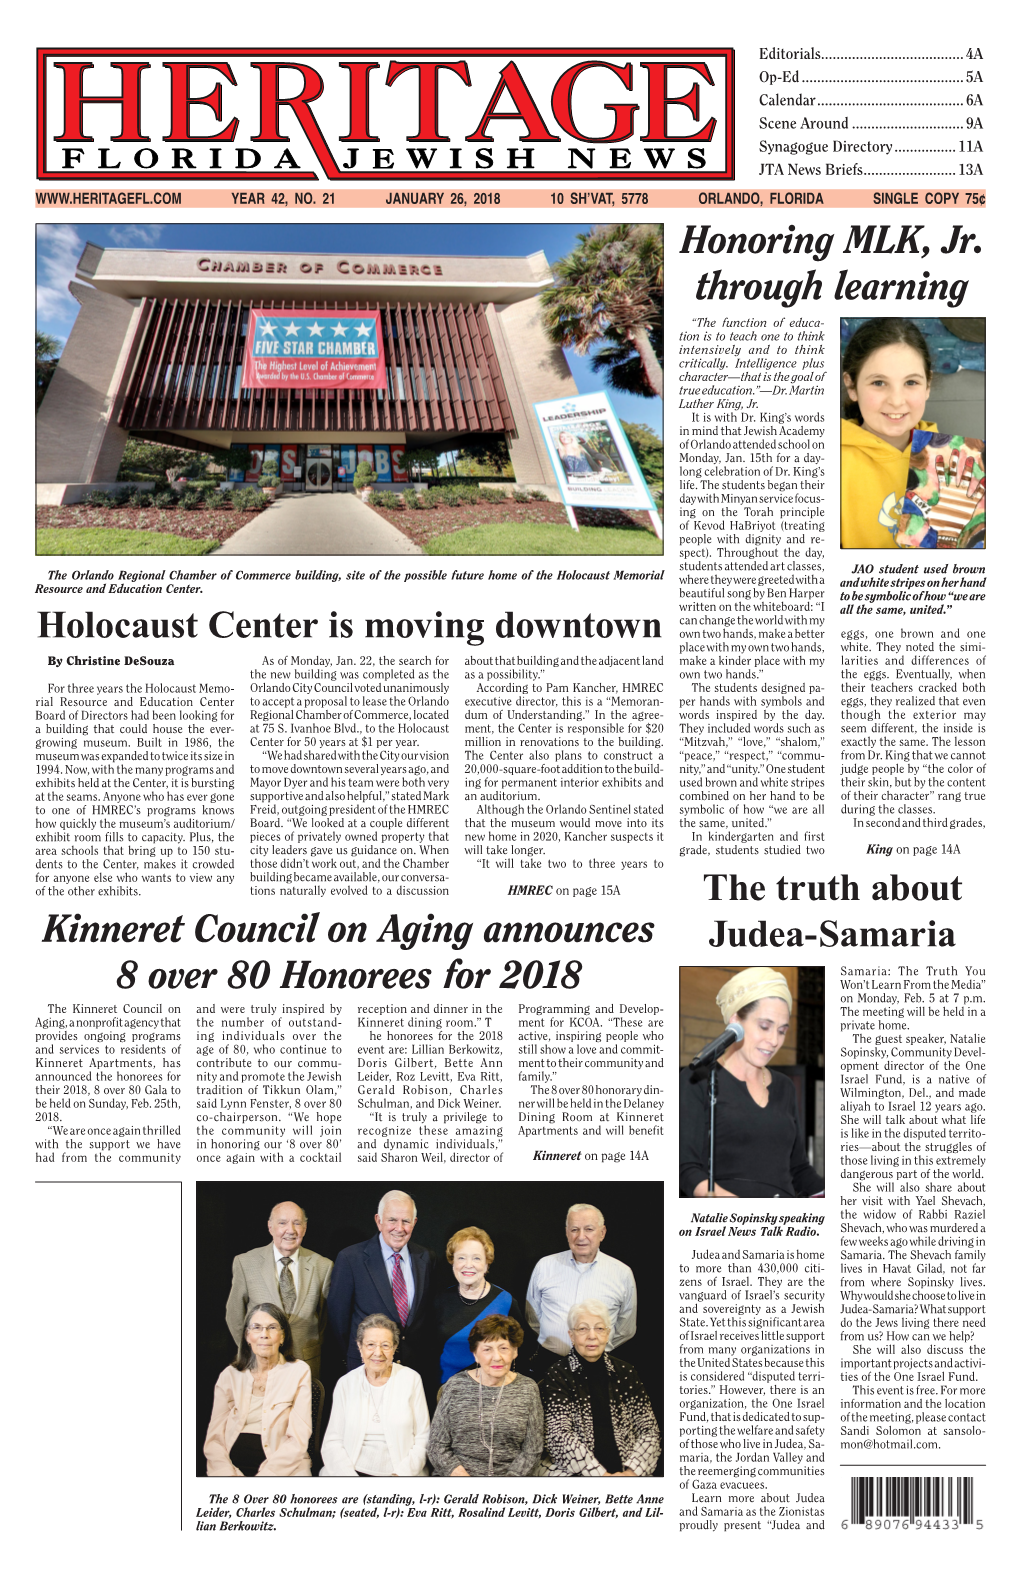 Holocaust Center Is Moving Downtown the Truth About Judea-Samaria